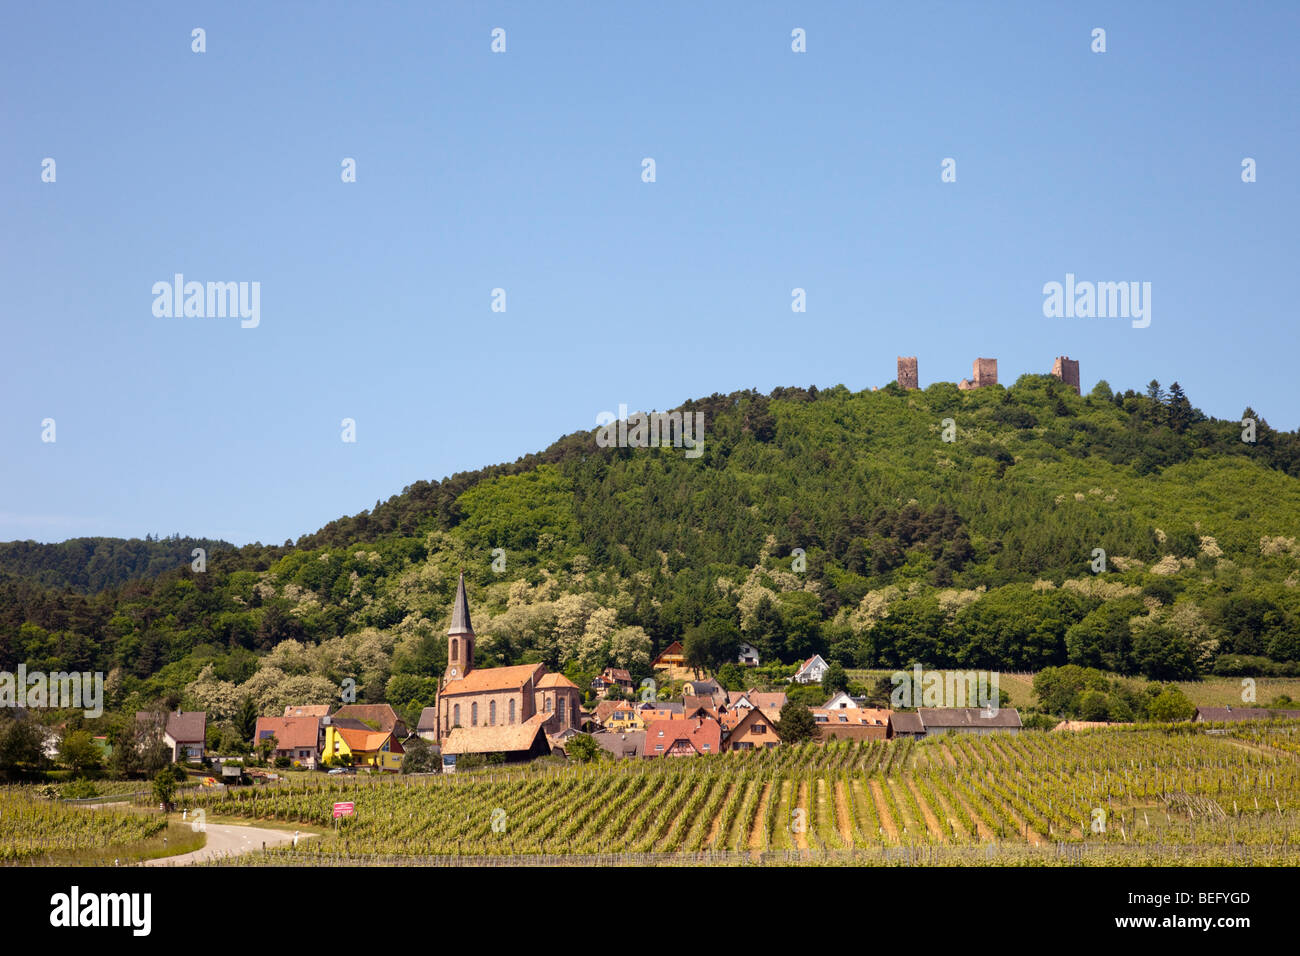 Husseren-les-Châteaux, Alsace, France. View of village and château ruins on Schlossberg Hill with vines growing in vineyards Stock Photo